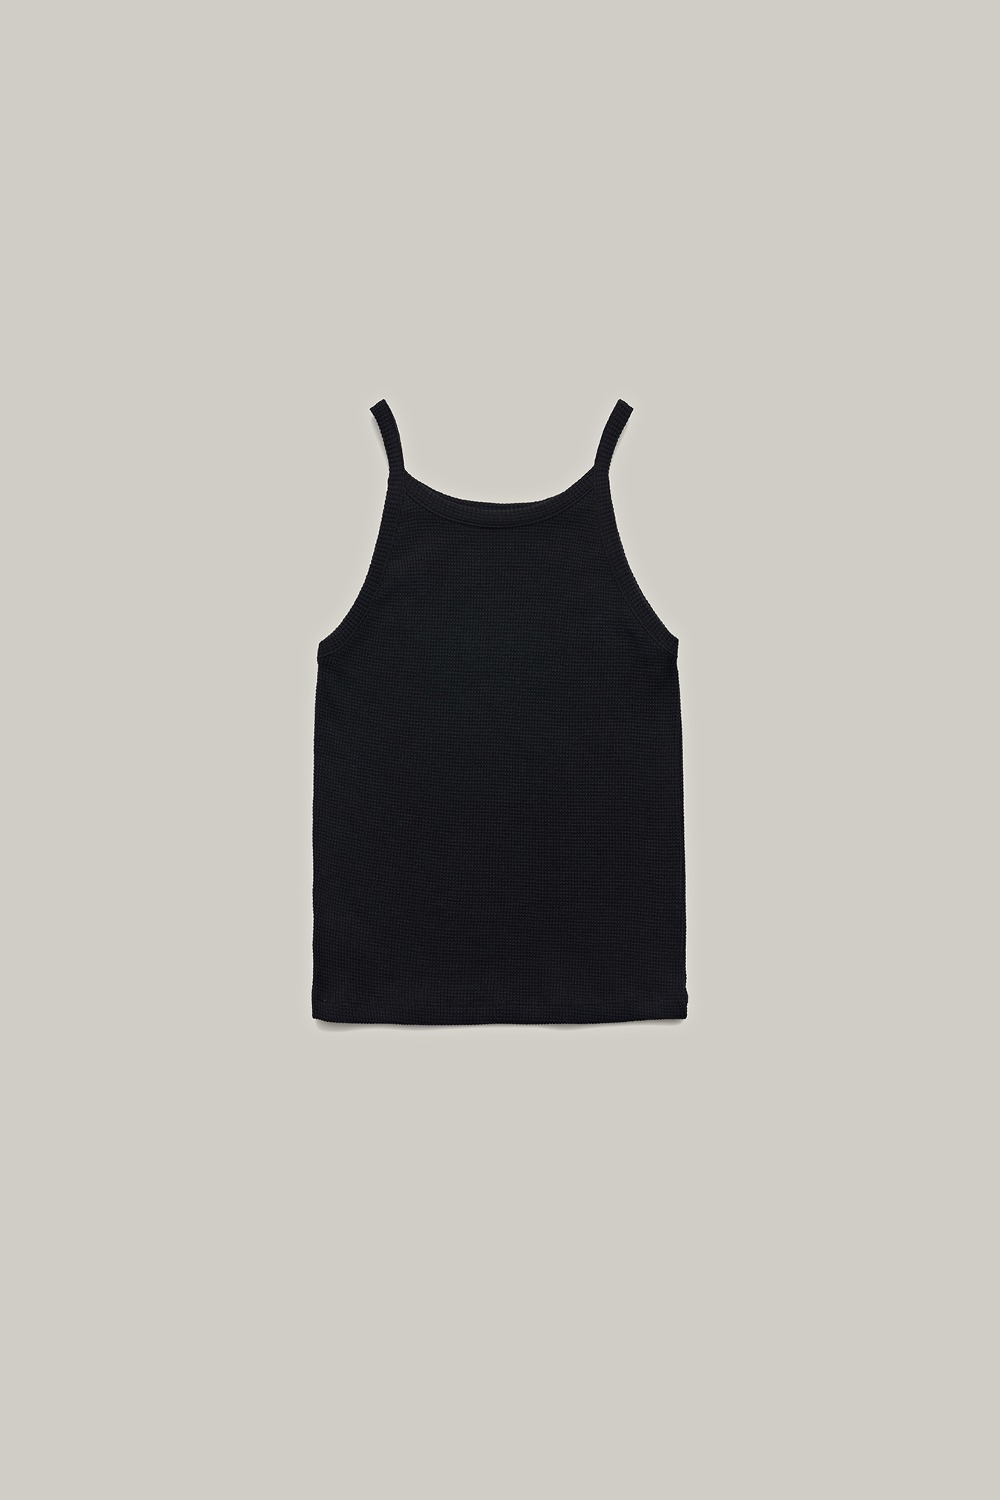 2nd/Coloring sleeveless top (Black)